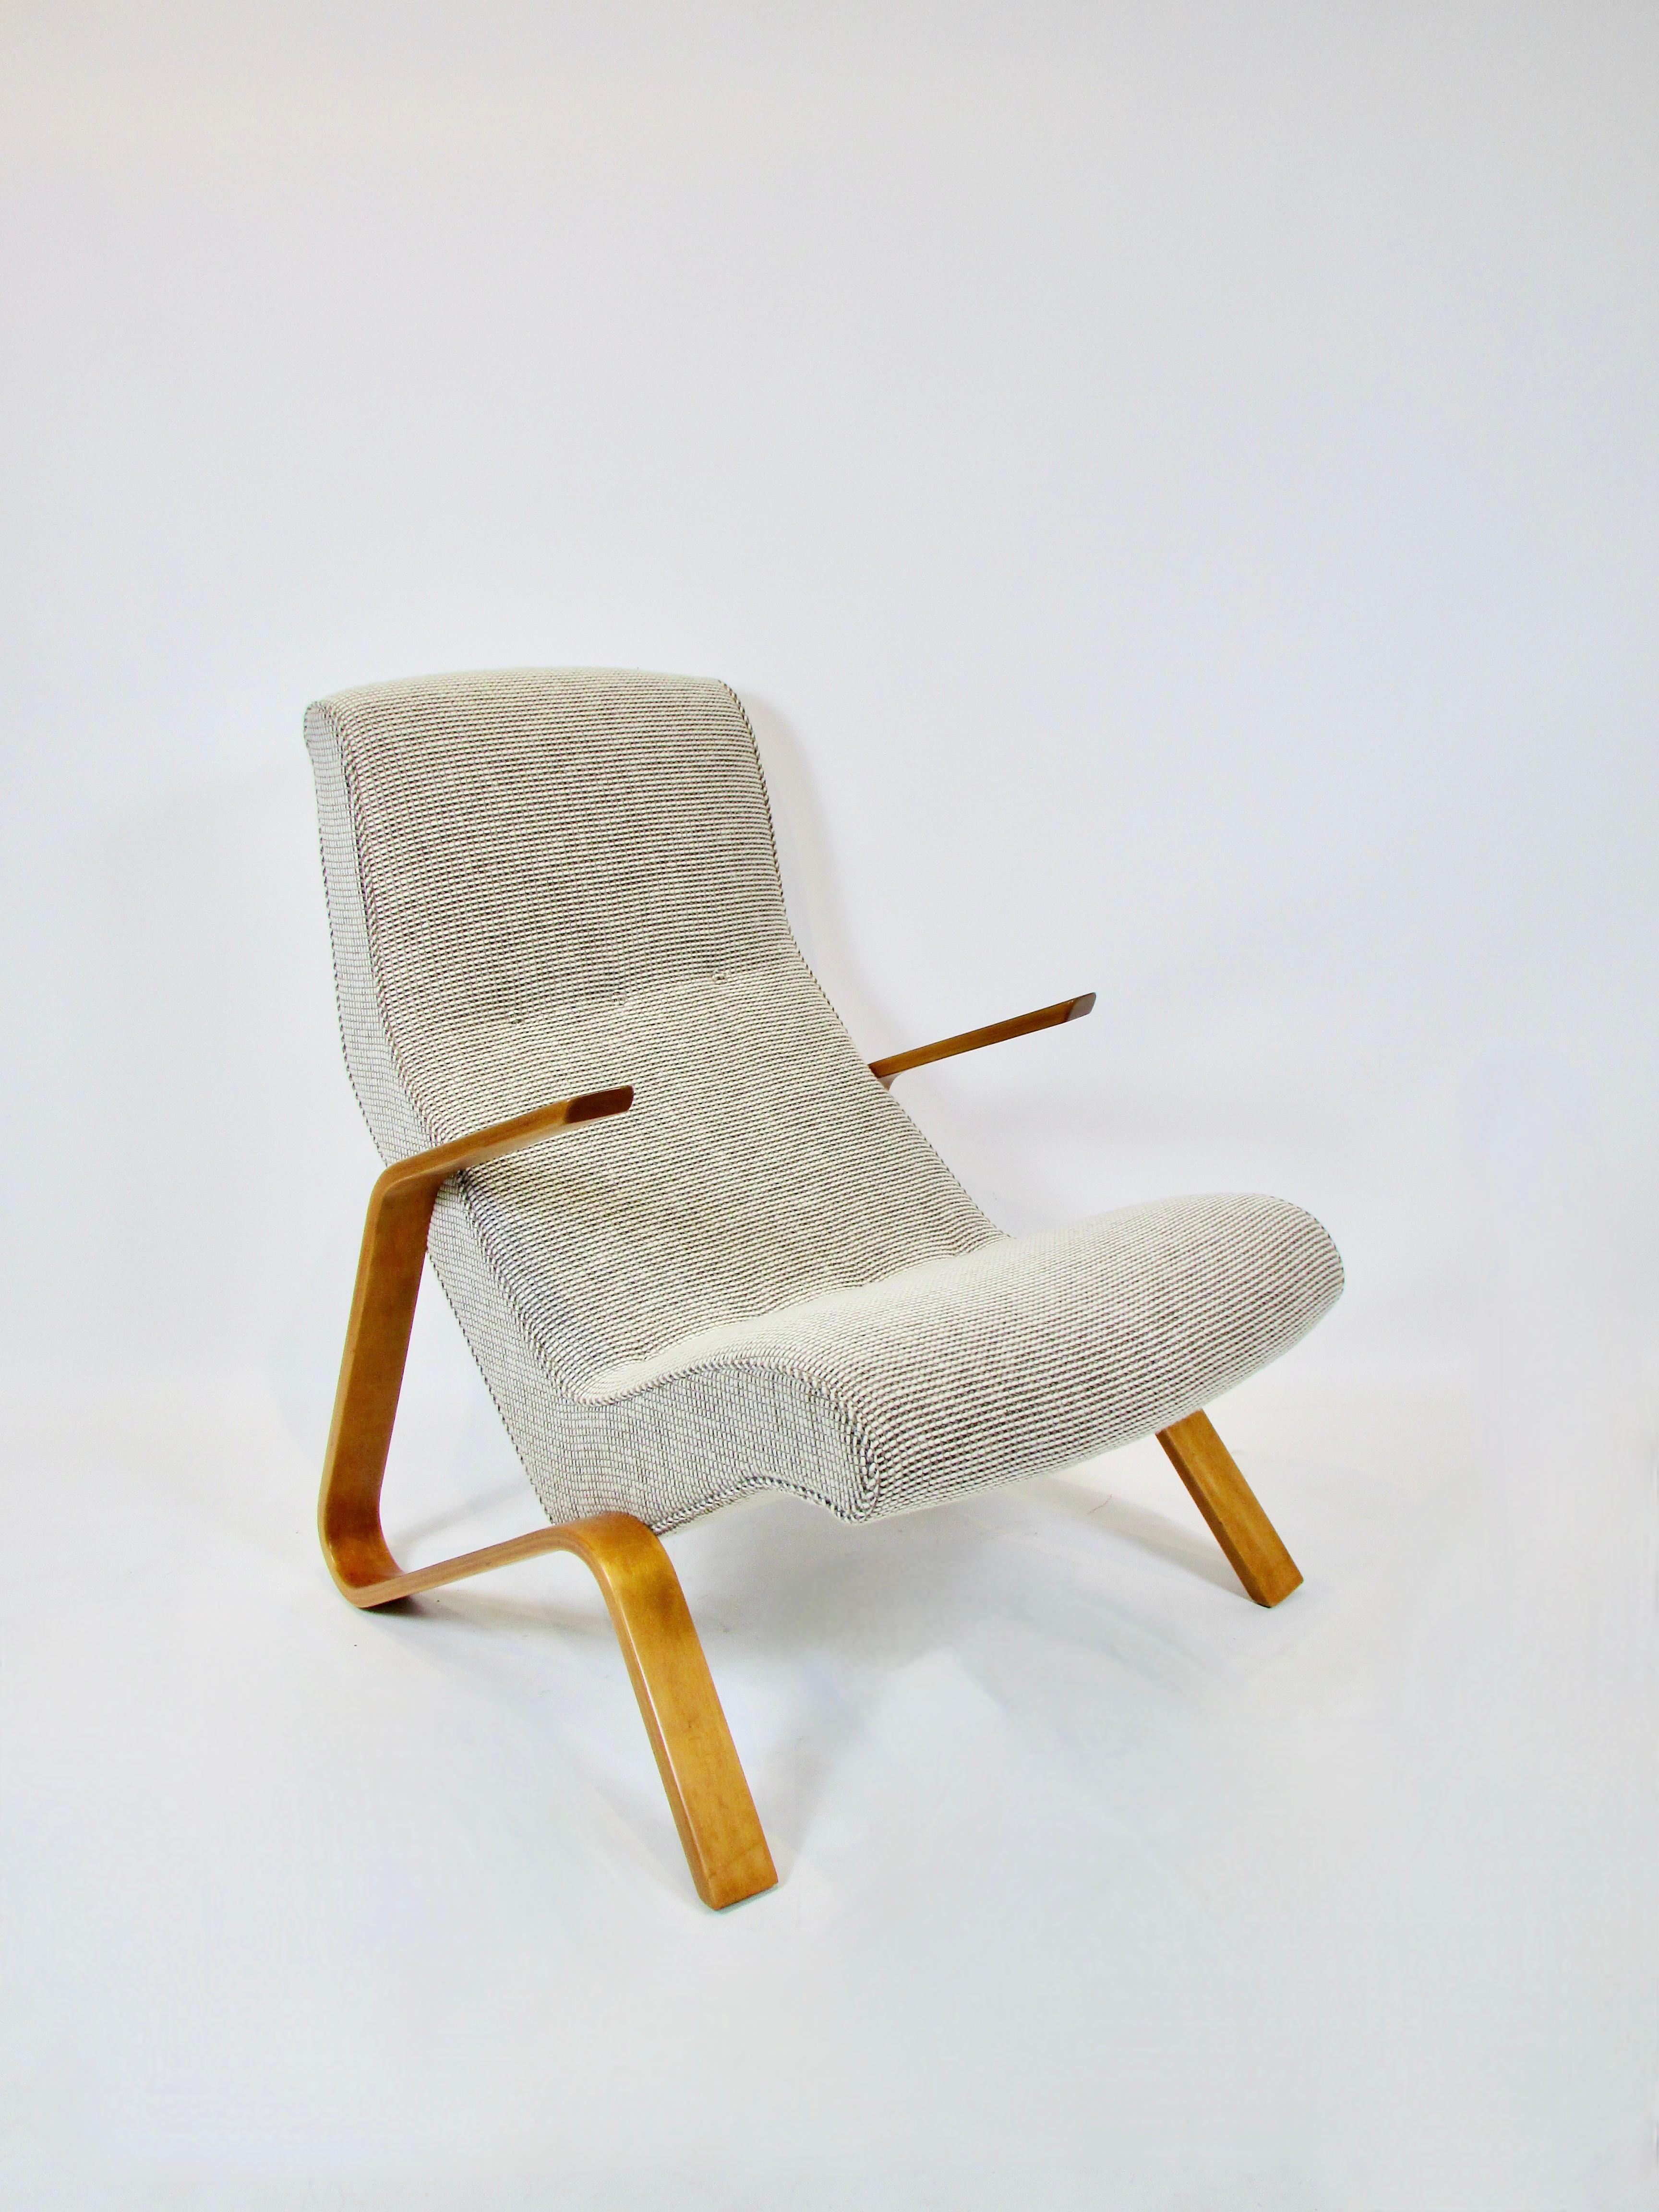 American Properly Restored Early Production Eero Saarinen Grasshopper Chair for Knoll For Sale